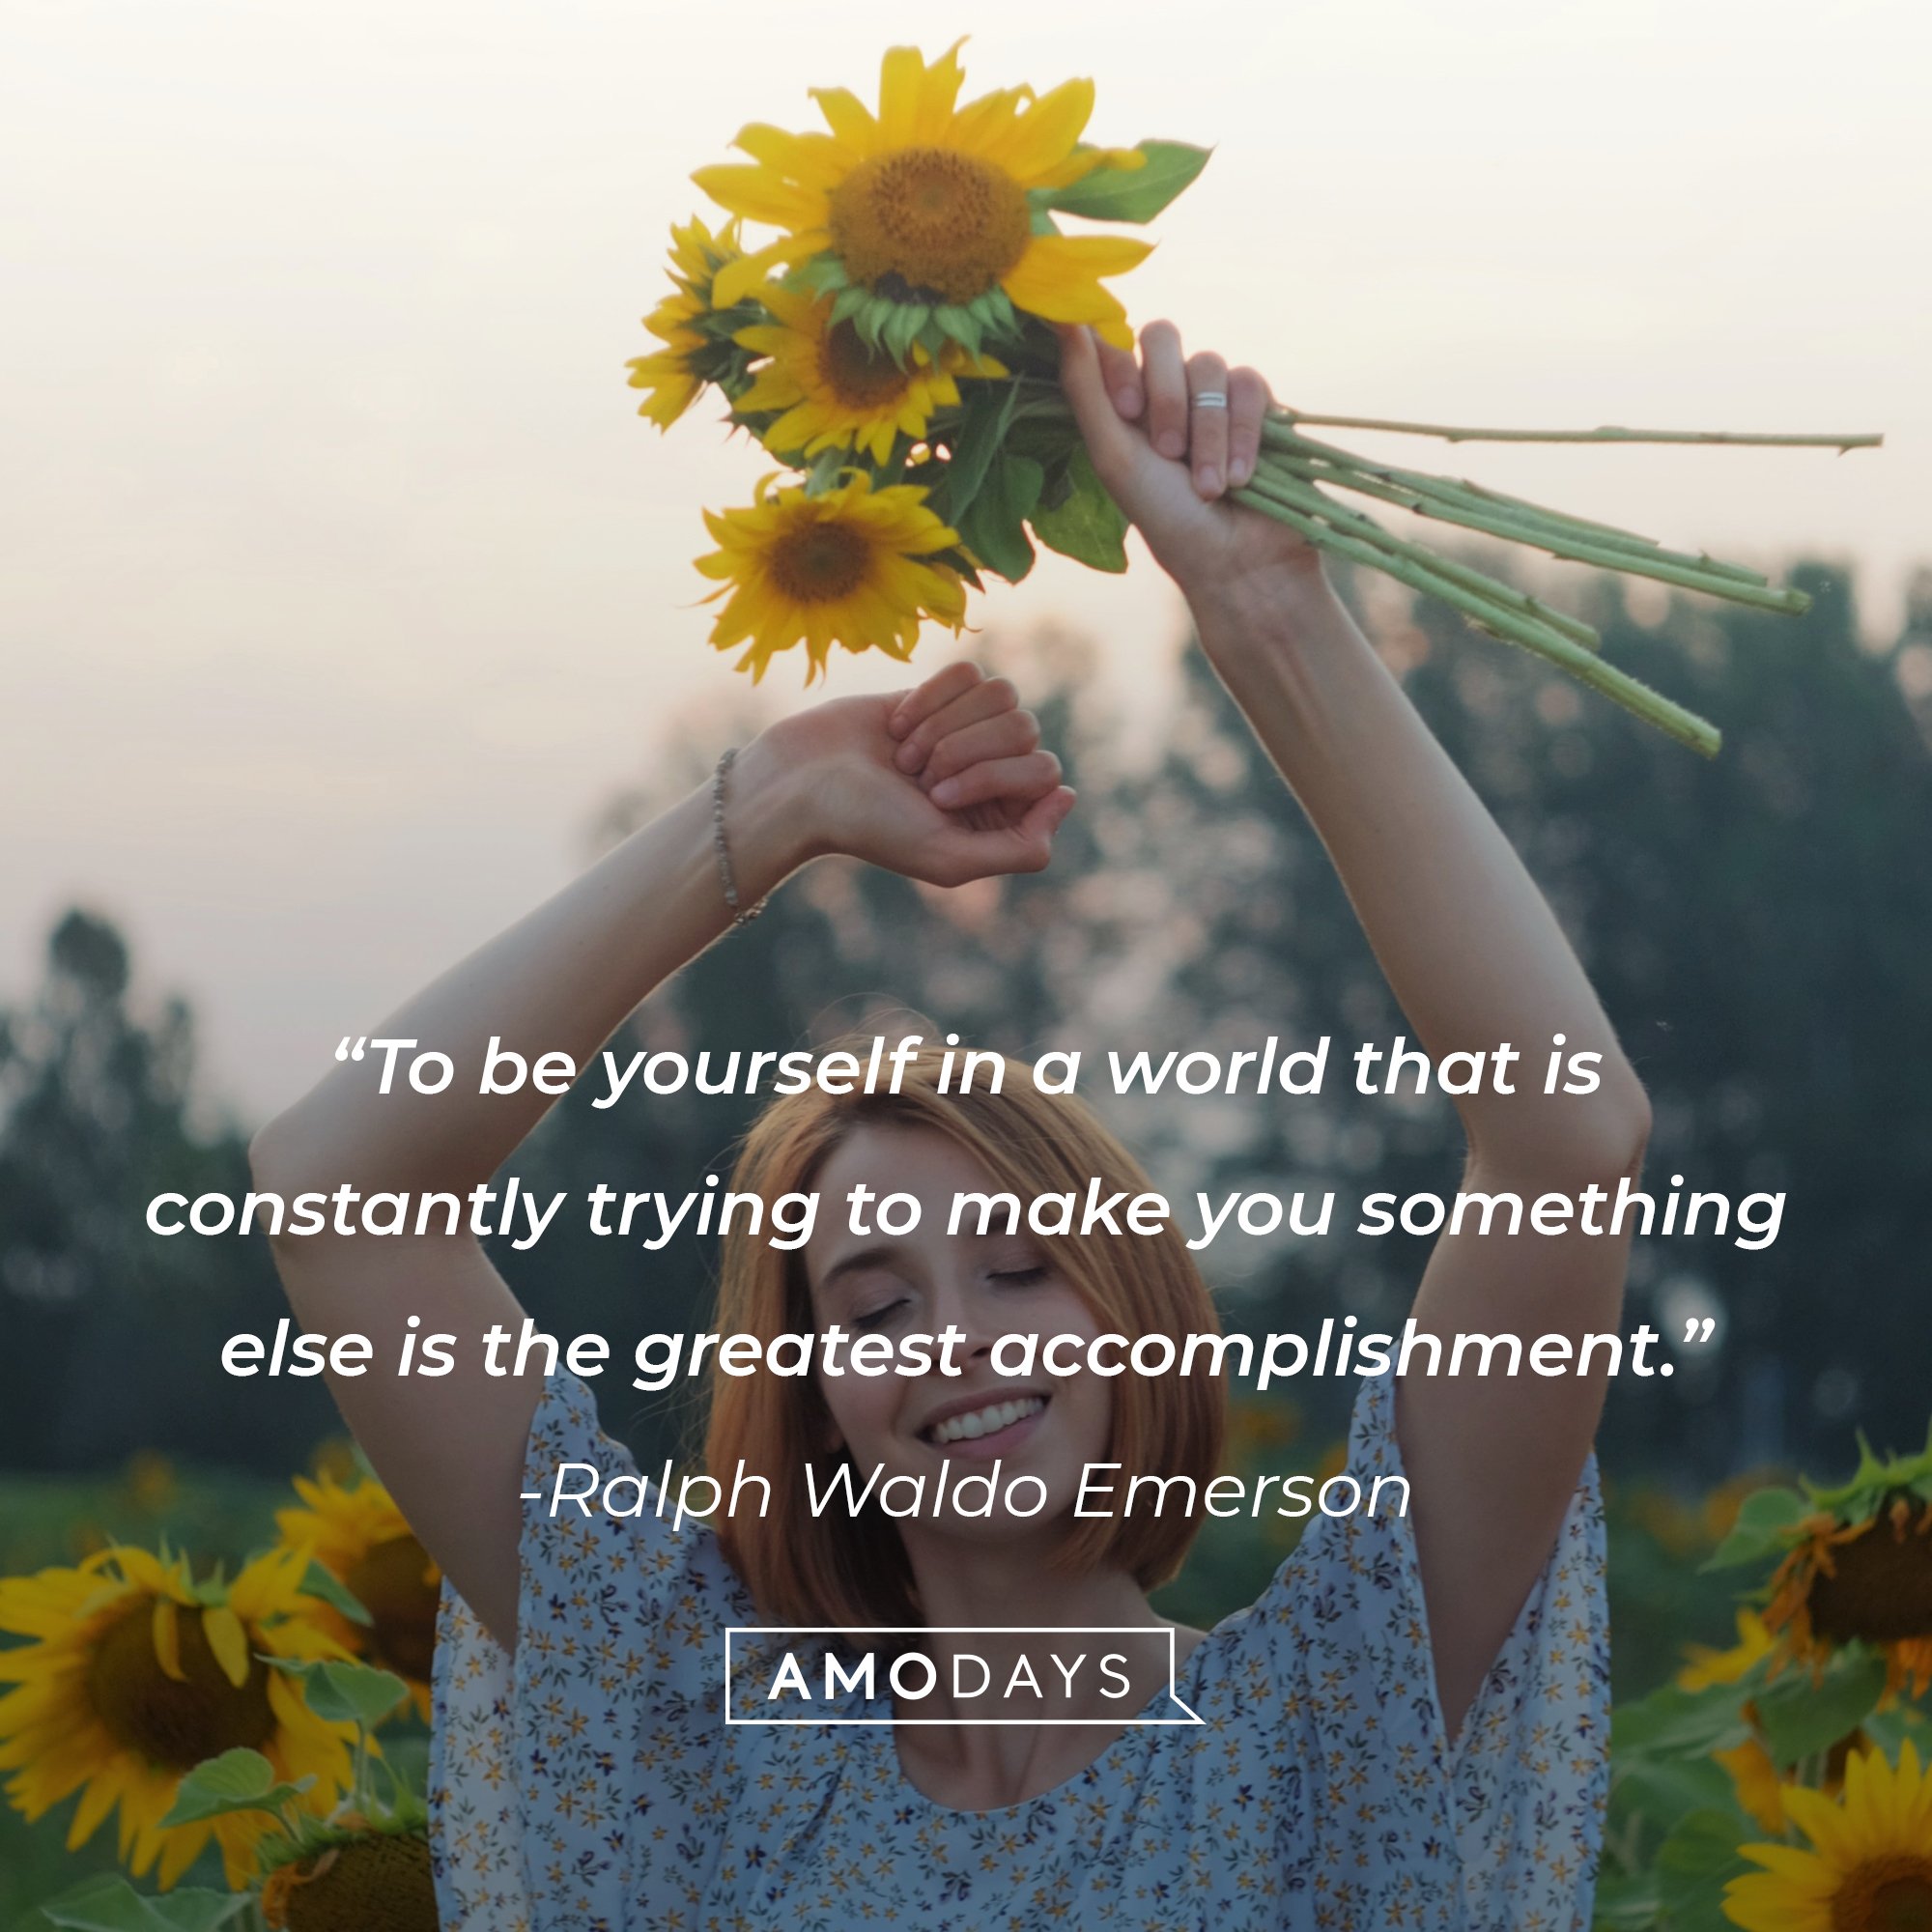 “To be yourself in a world that is constantly trying to make you something else is the greatest accomplishment.” | Image: AmoDays